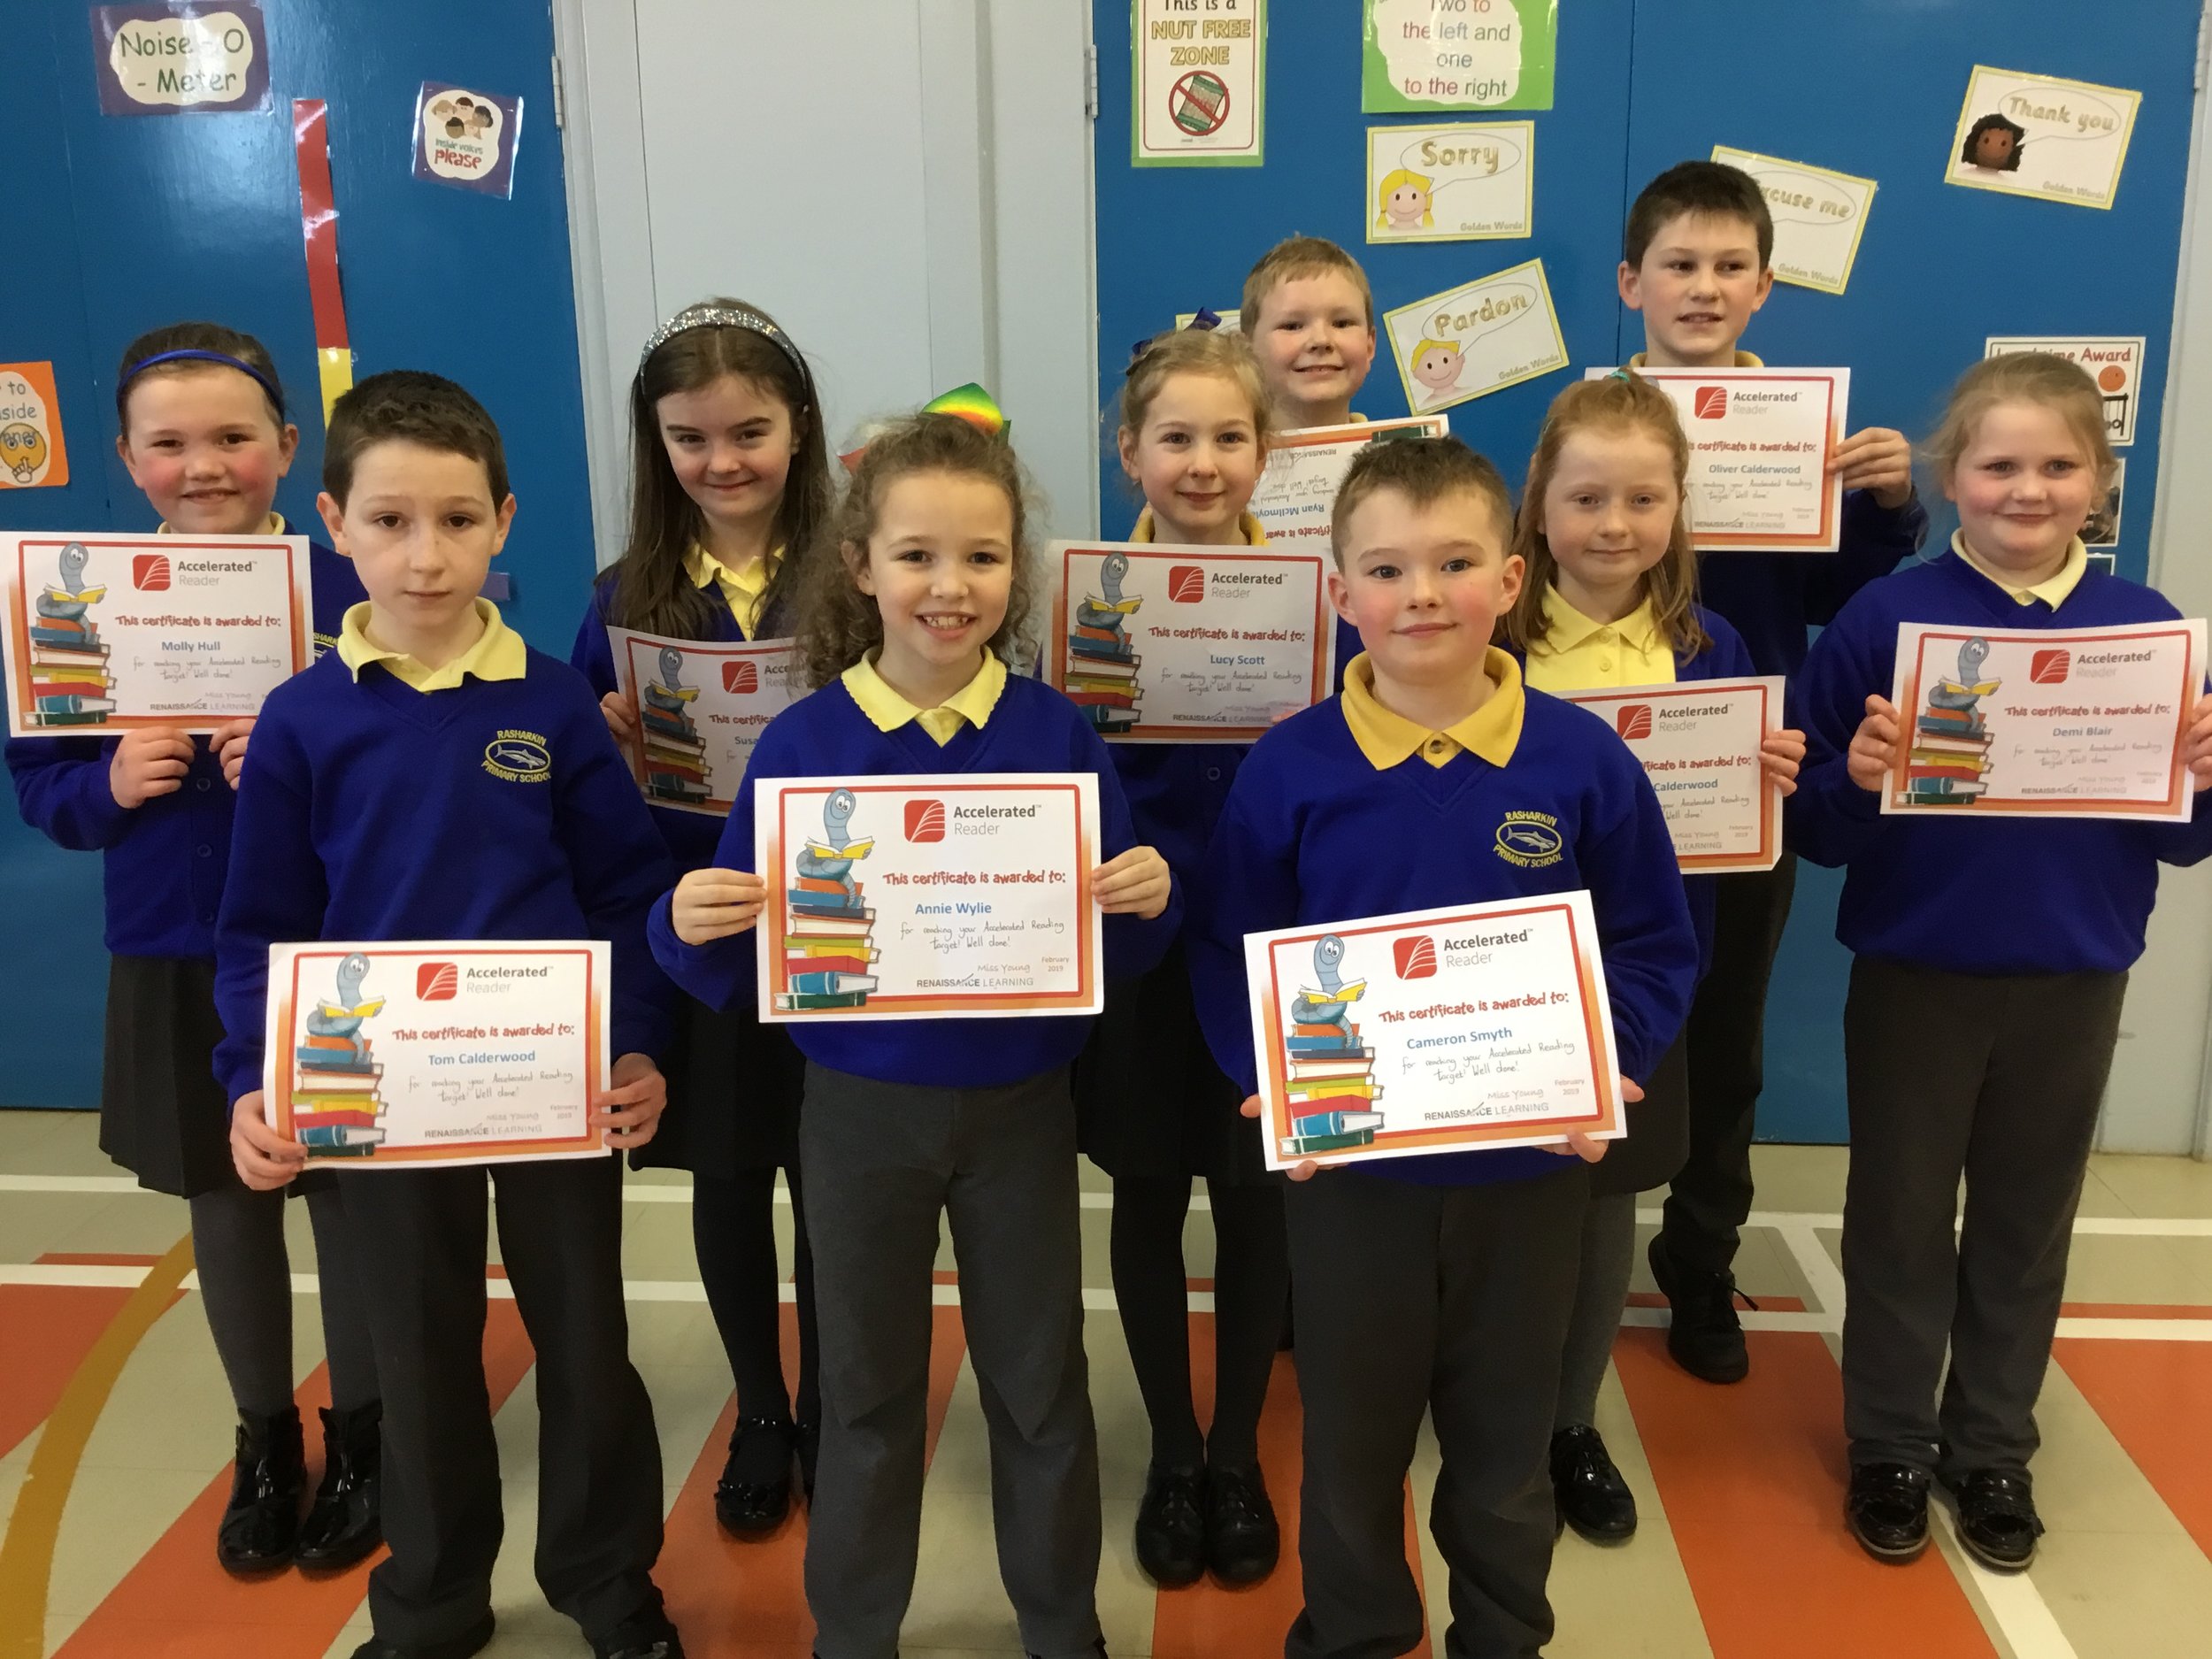  P5 children with their Accelerated Reading Certificates 